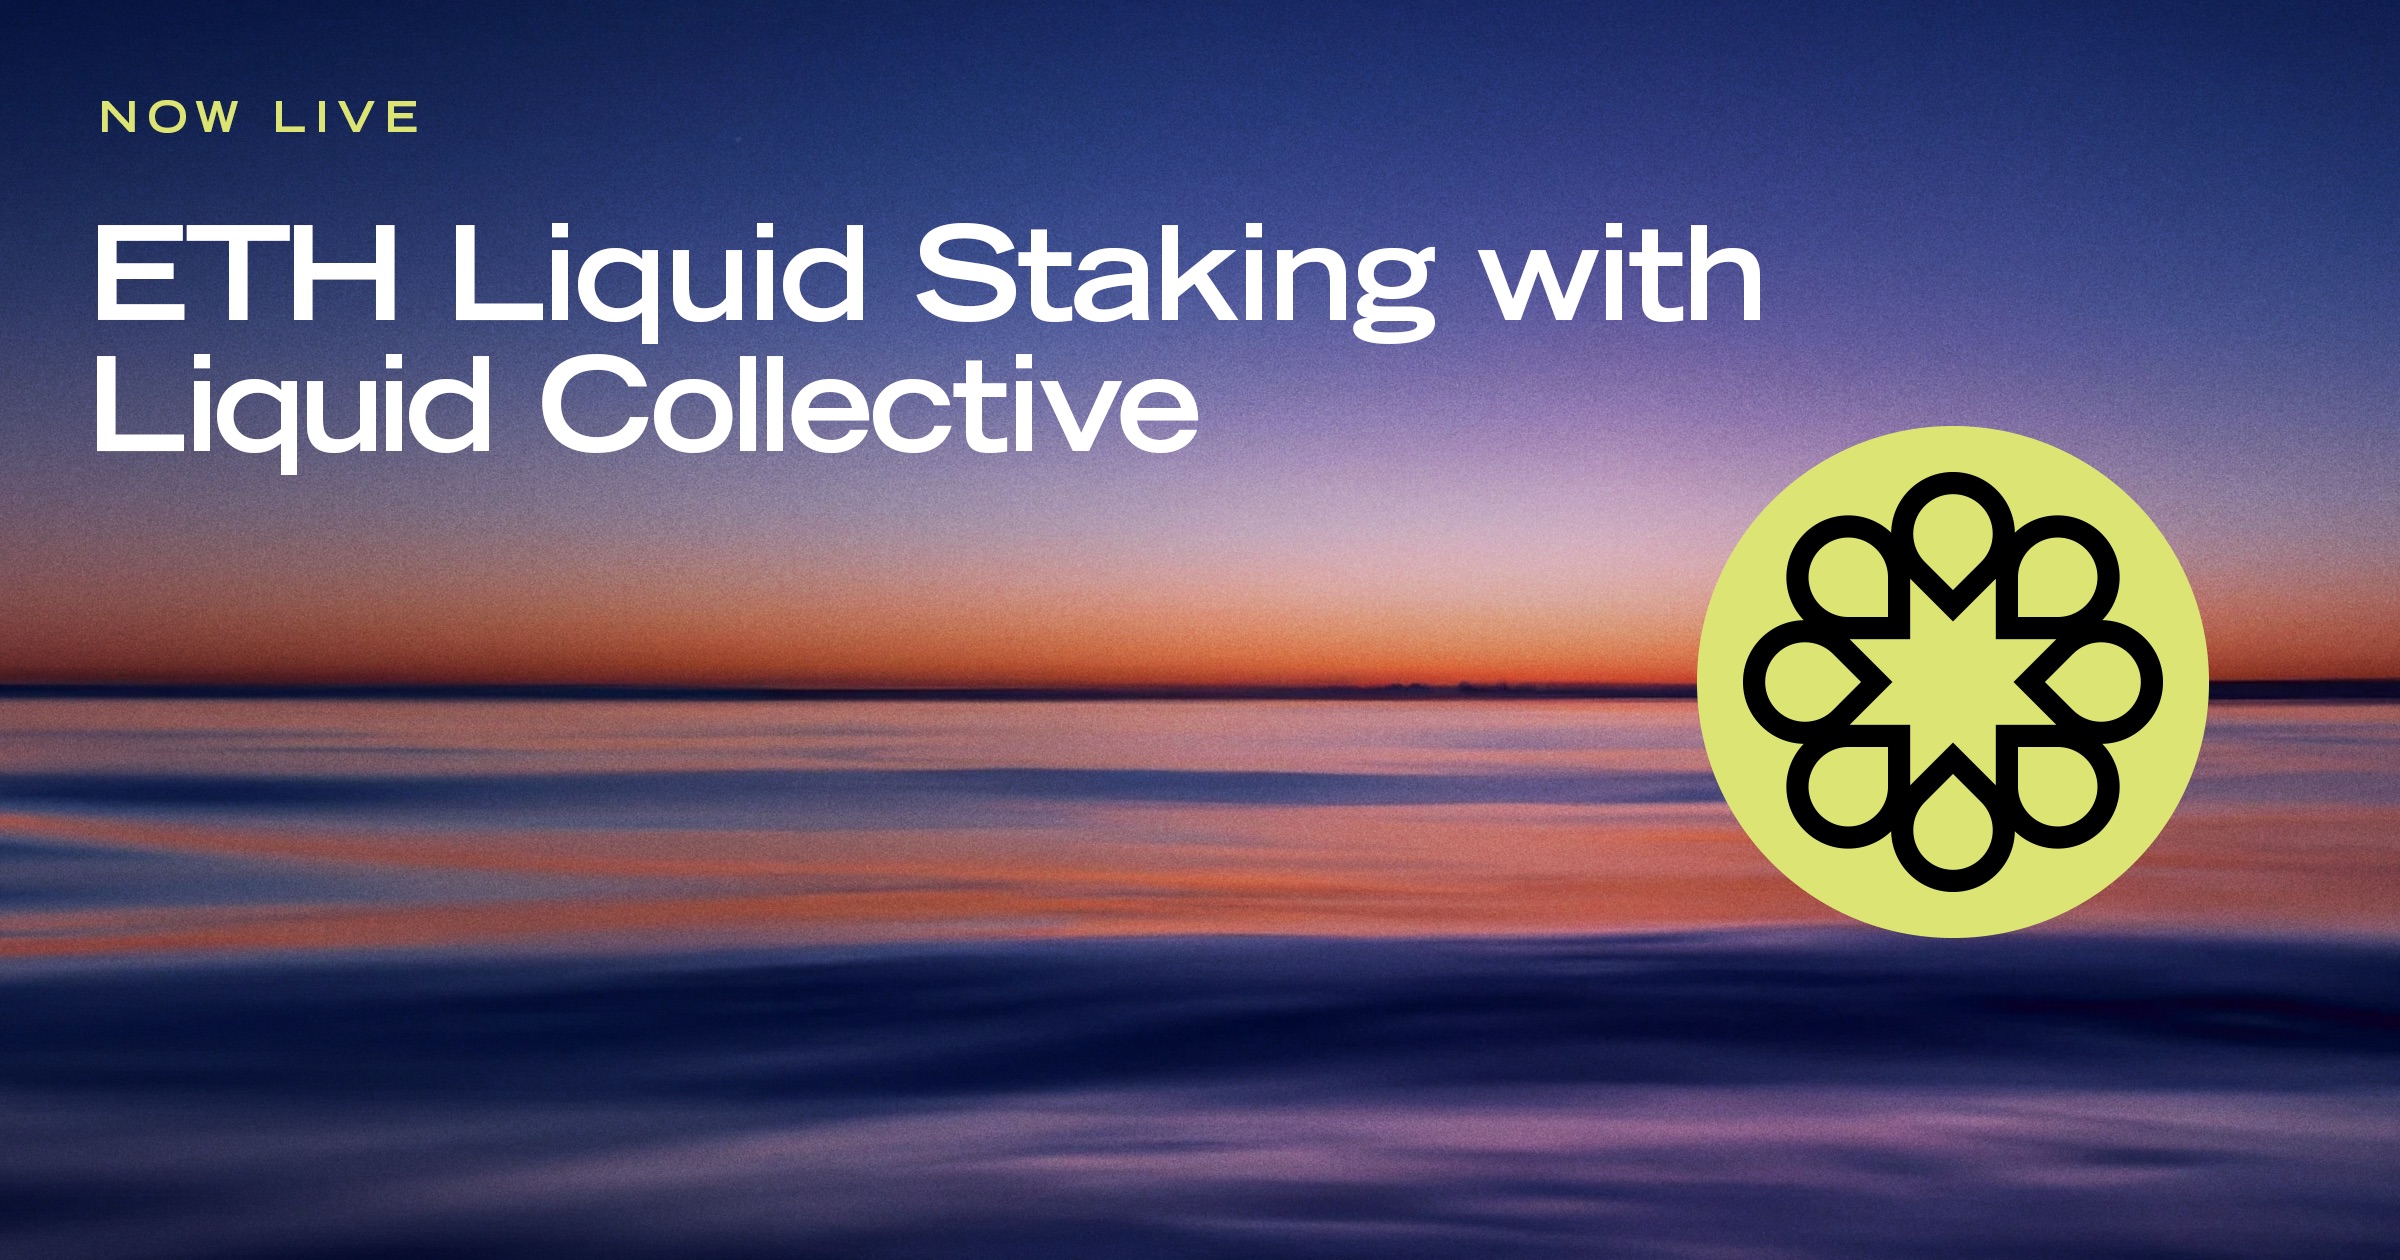 Now Live: ETH Liquid Staking with Liquid Collective